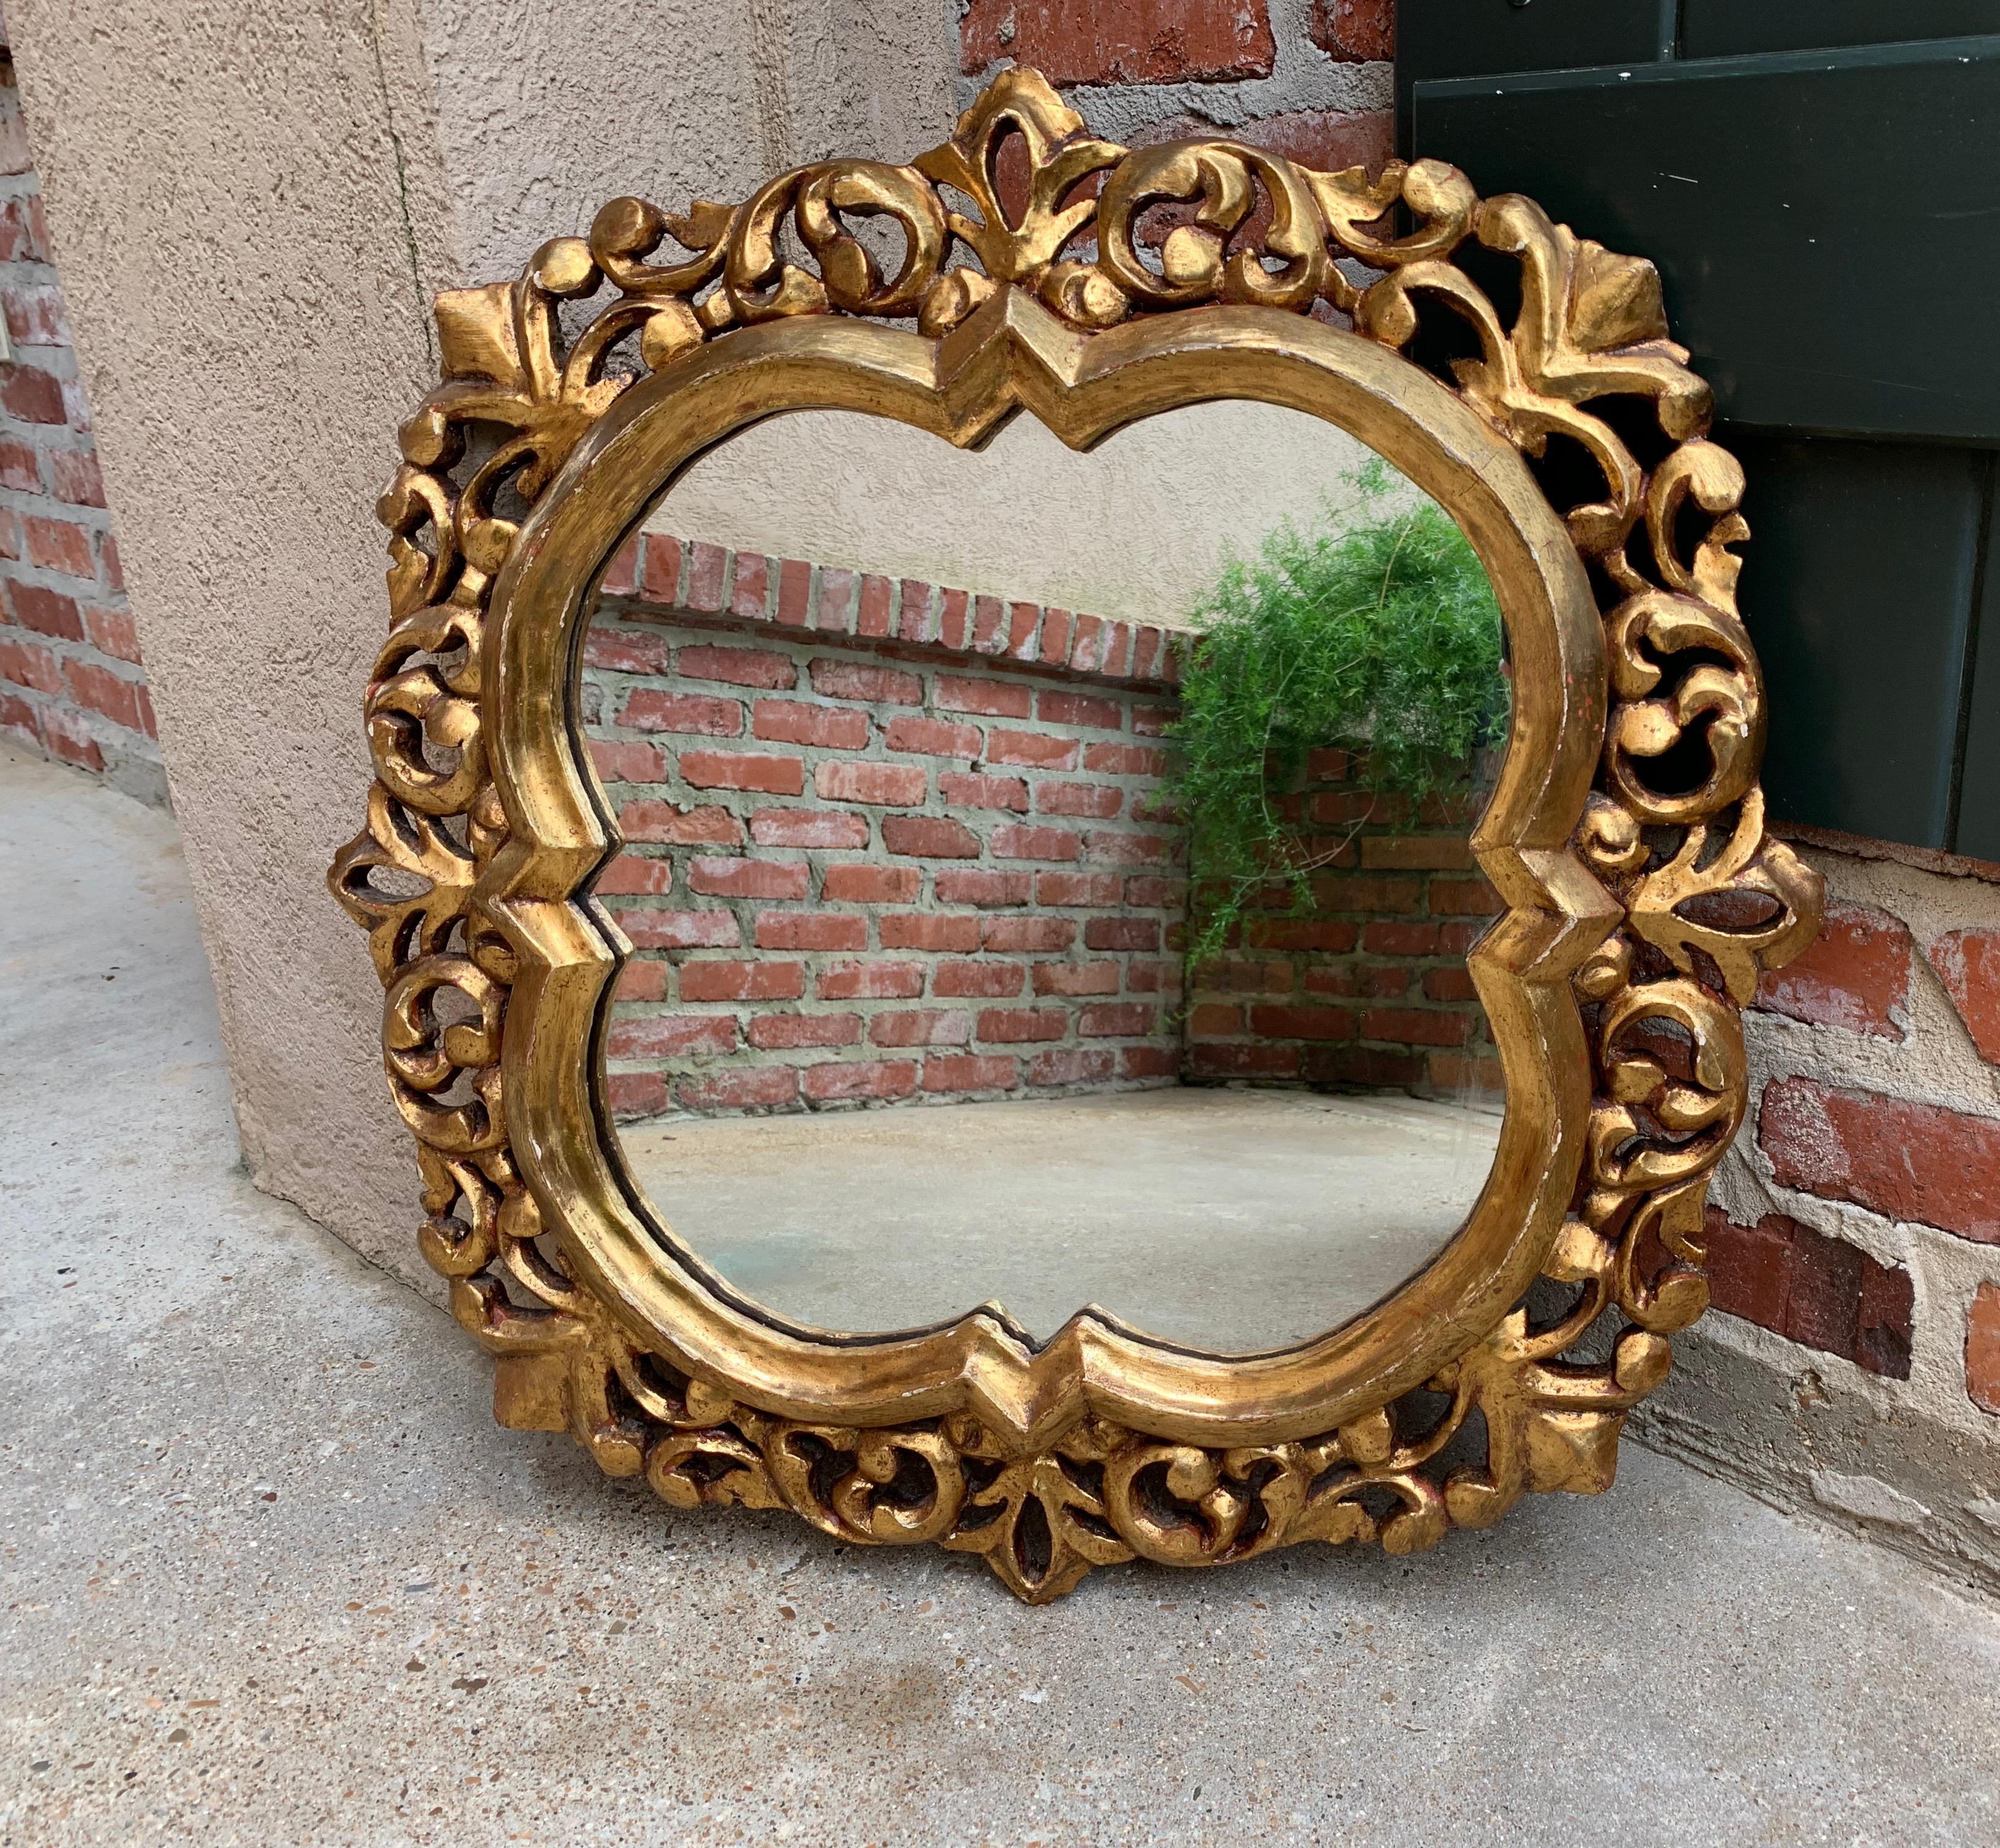 ~Direct from Italy~
~Beautifully shaped antique Italian wall mirror, gold gilt gesso frame with gorgeous details!~
~This is one mirror; there is a matching mirror available~
~circa 1920~

Measurements:
24.5